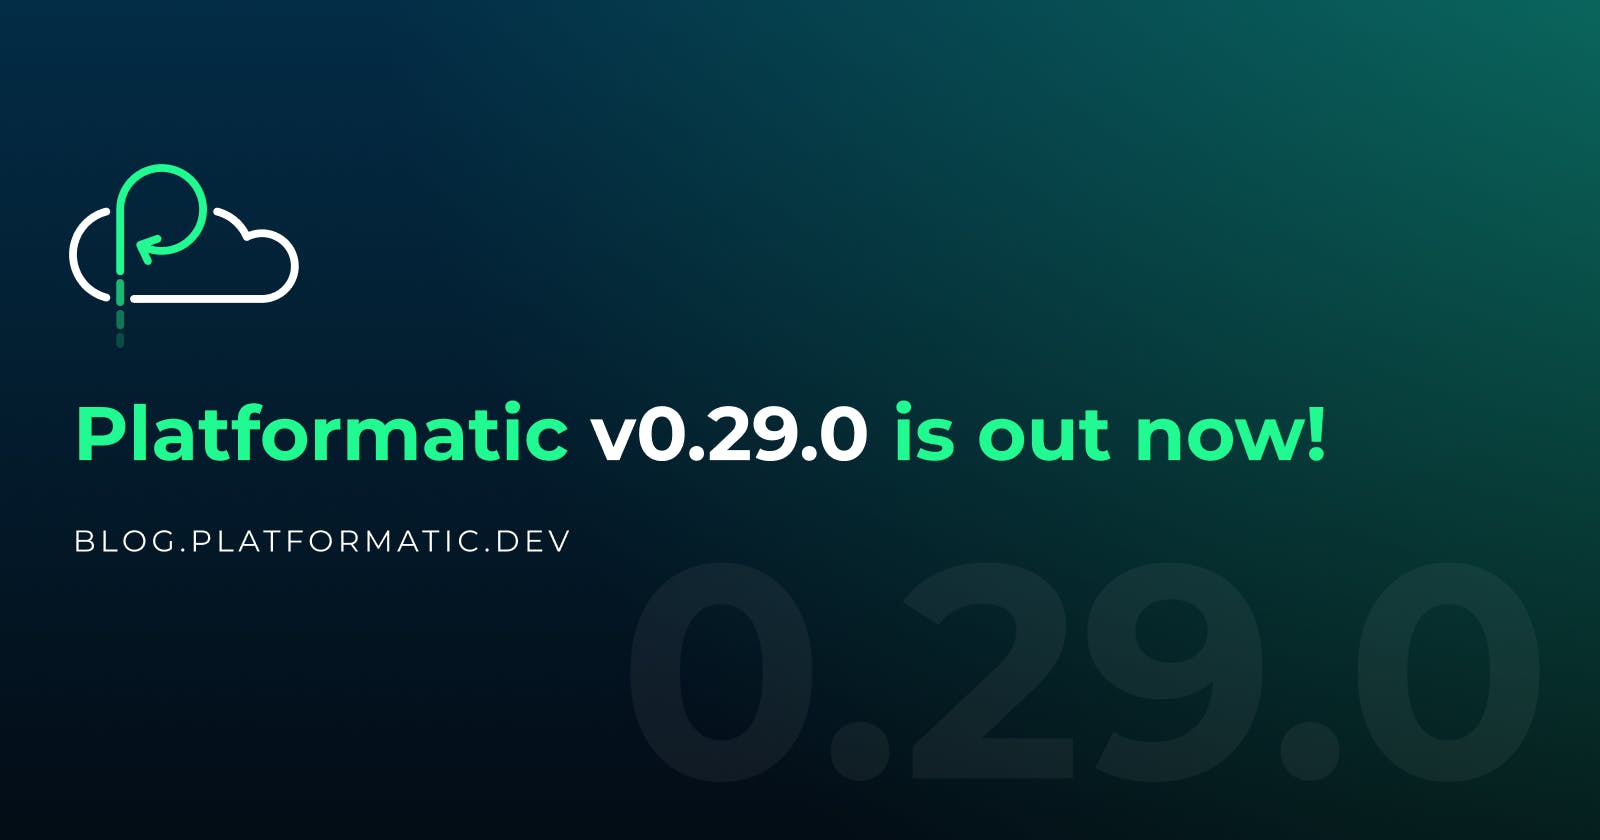 Platformatic v0.29.0 is out now!